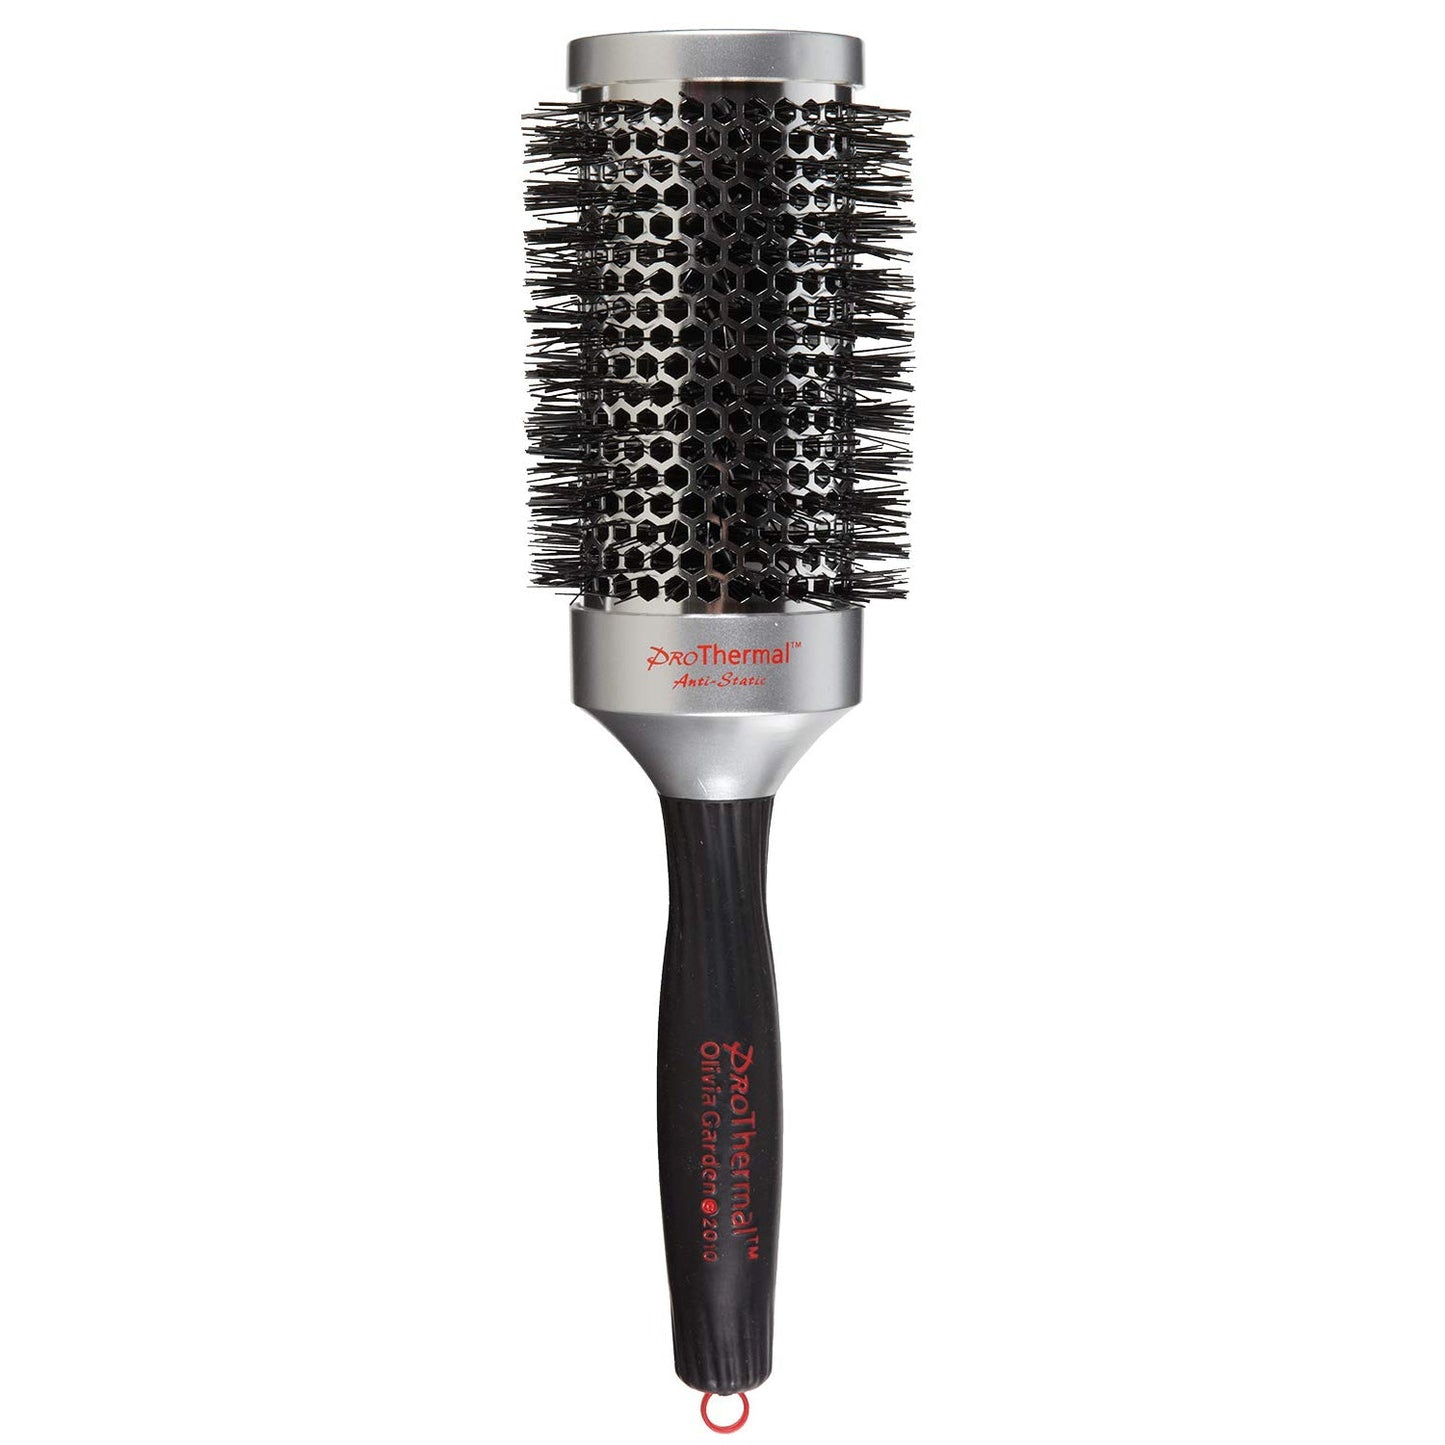 T-53 | 2 1/4" | ProThermal Anti-Static Collection | OLIVIA GARDEN - SH Salons